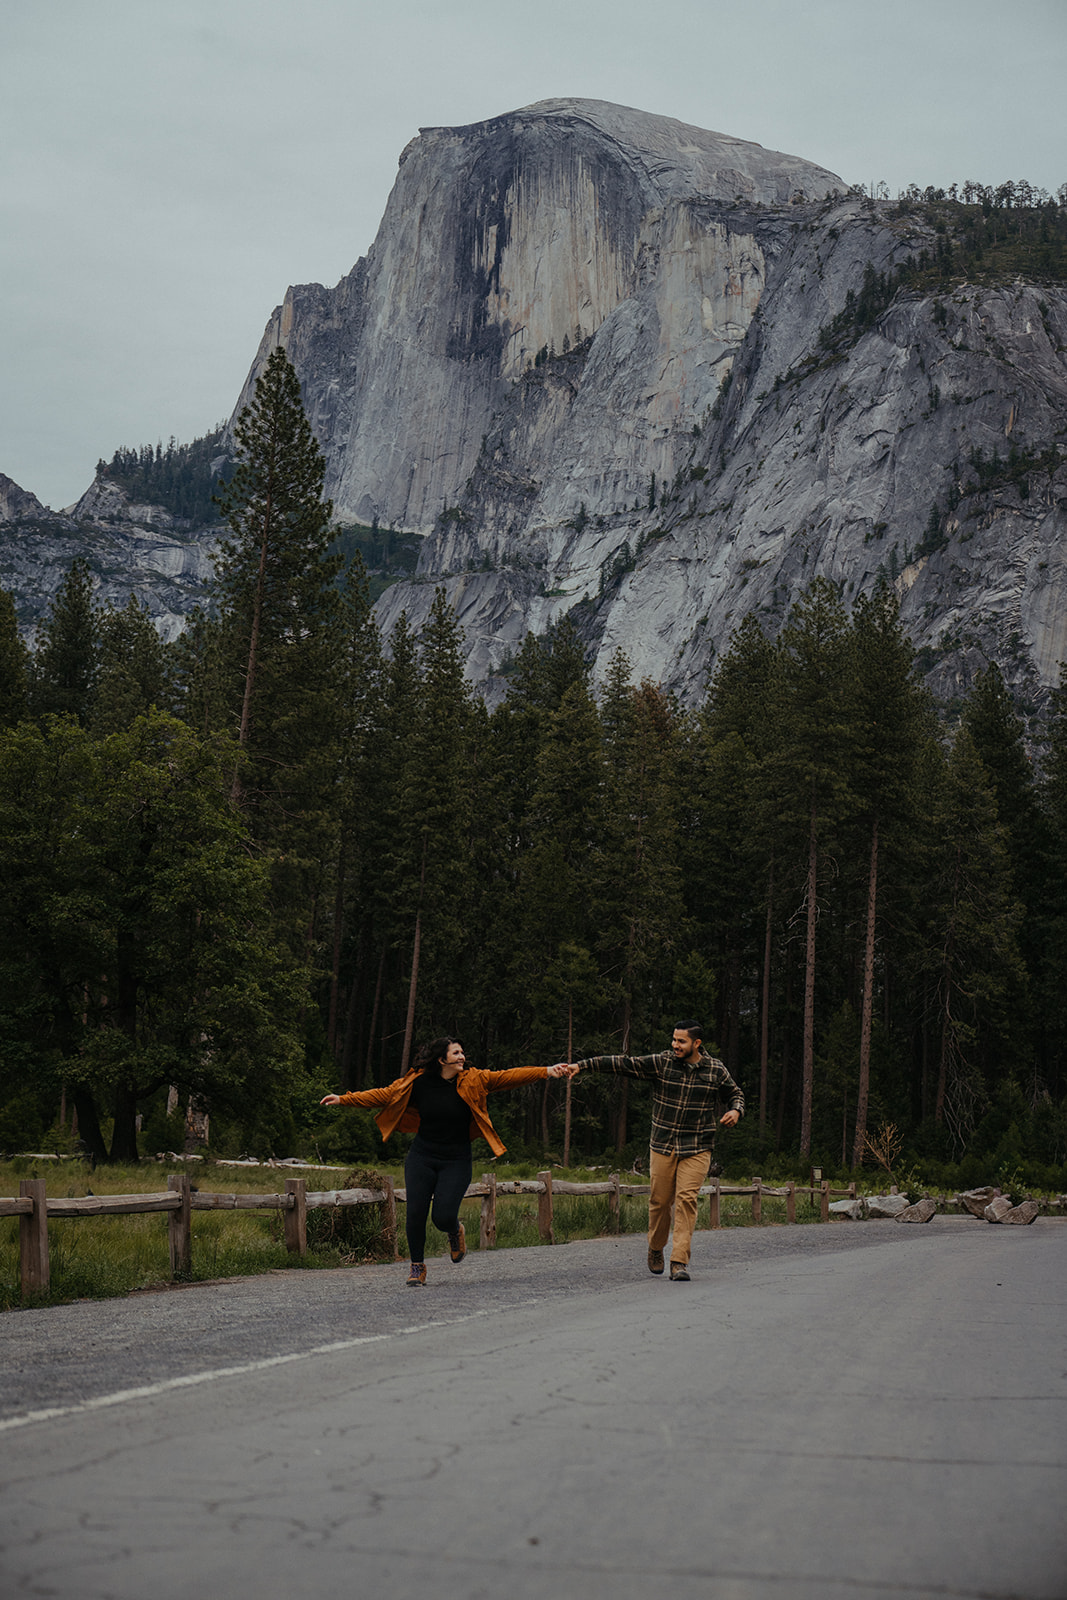 Adventurous Couple runs through the street on the Yosemite Valley floor, holding hands with Half Dome in the background